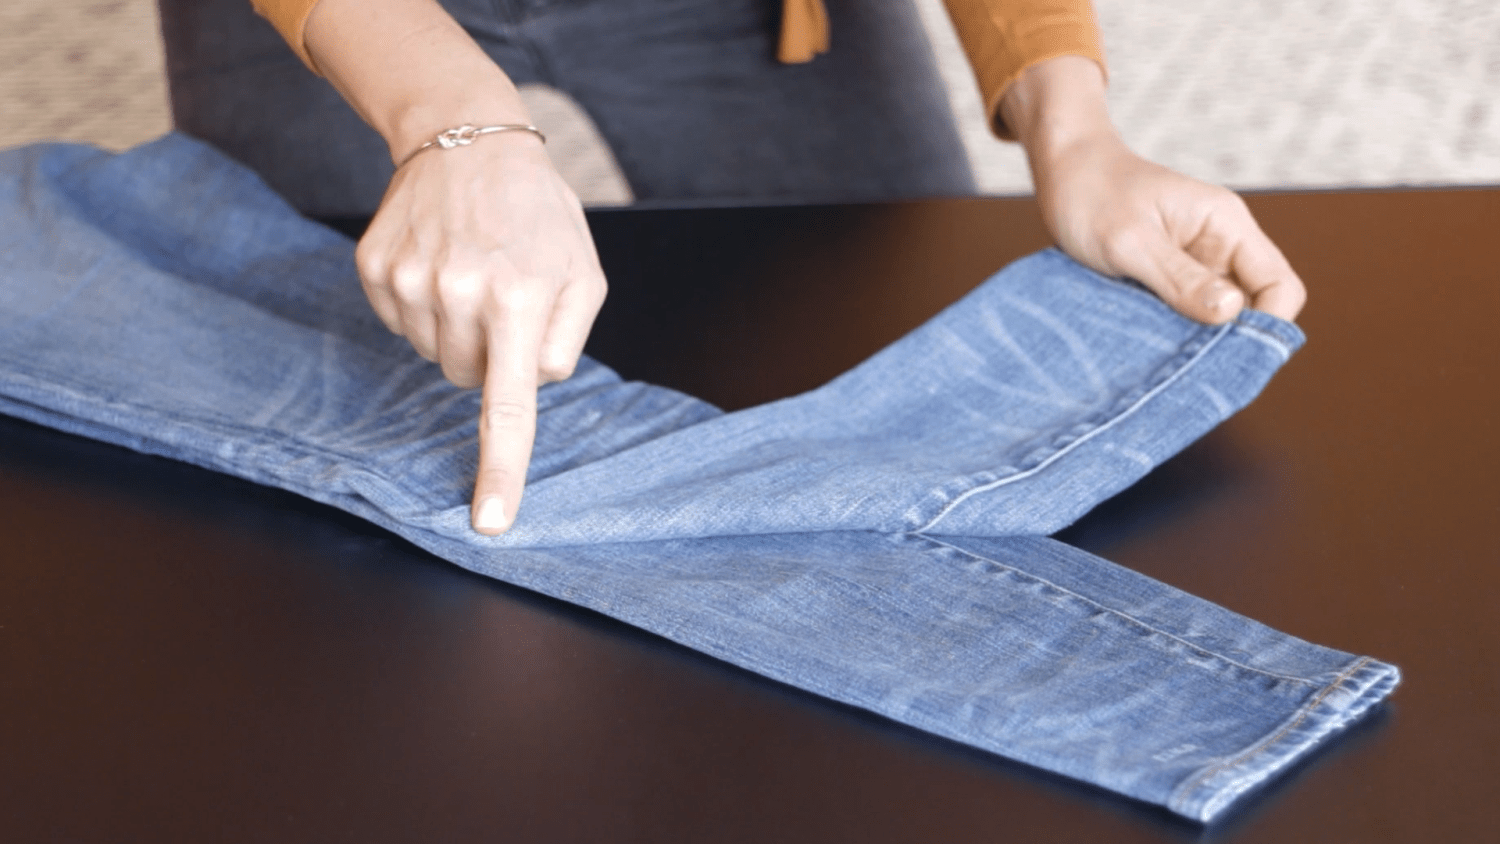 Cleaning: How to fold underwear - folding hack dubbed 'so good' by fans |  Express.co.uk